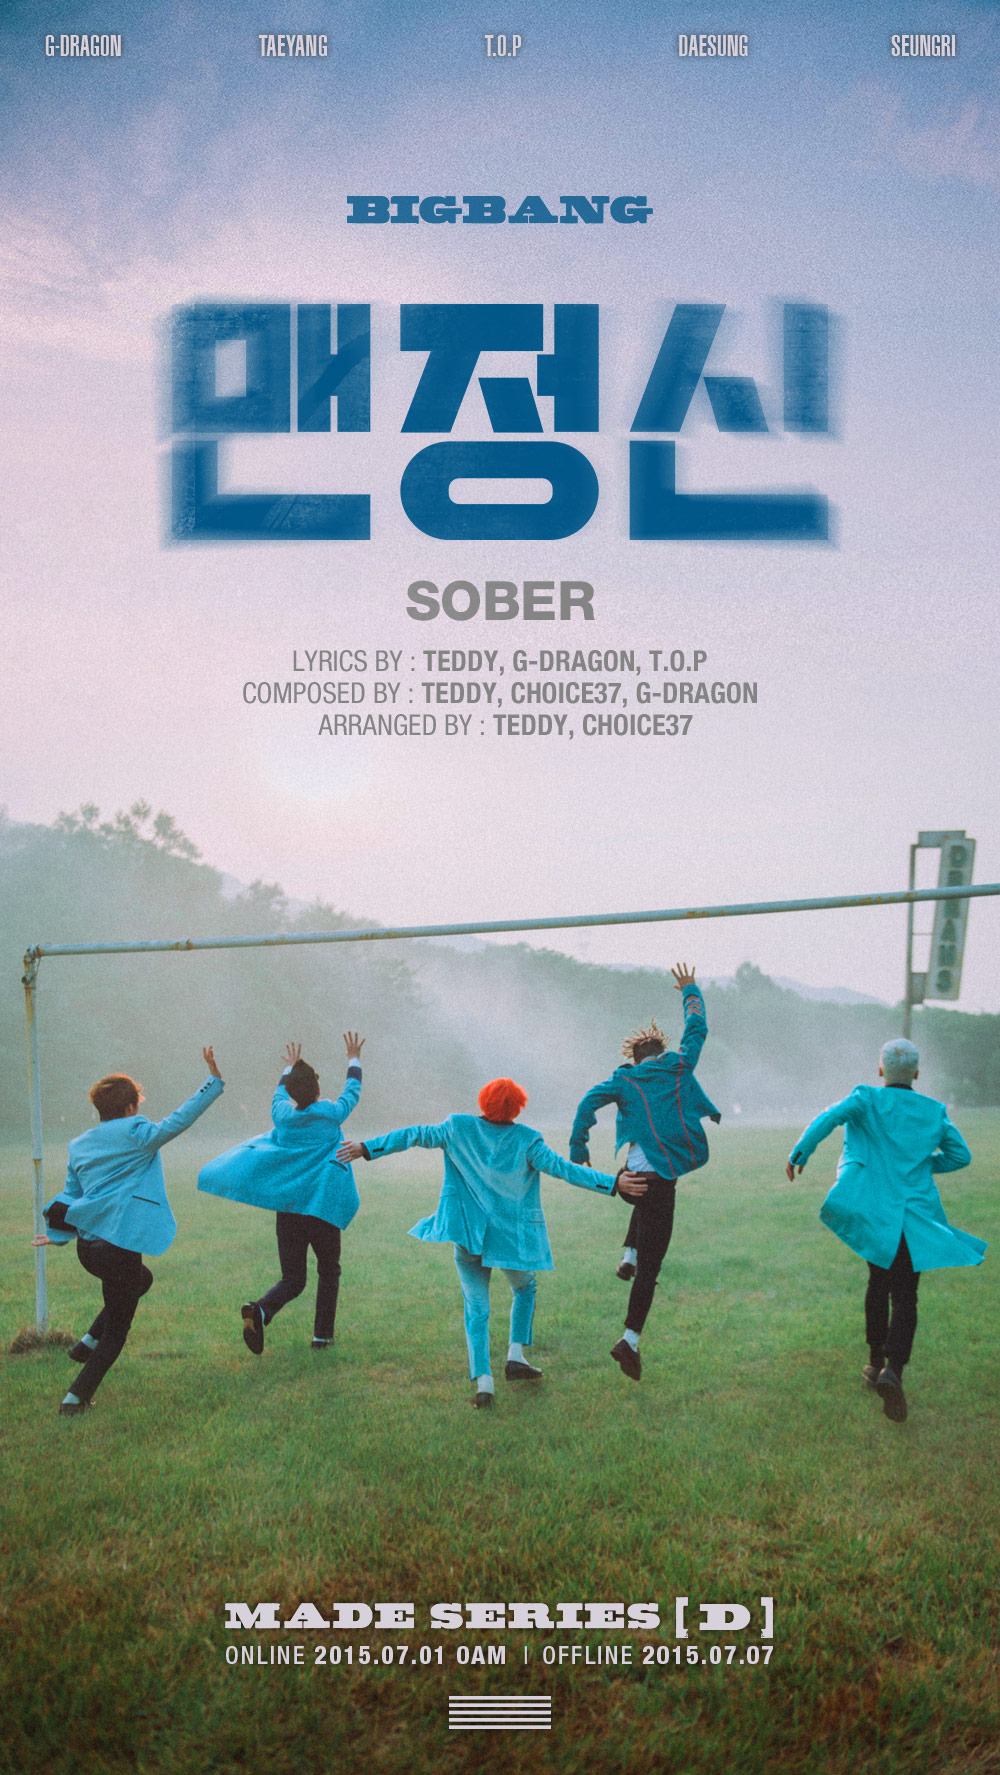 BIGBANG Releases Teaser Poster for Second Track from “MADE Series D”